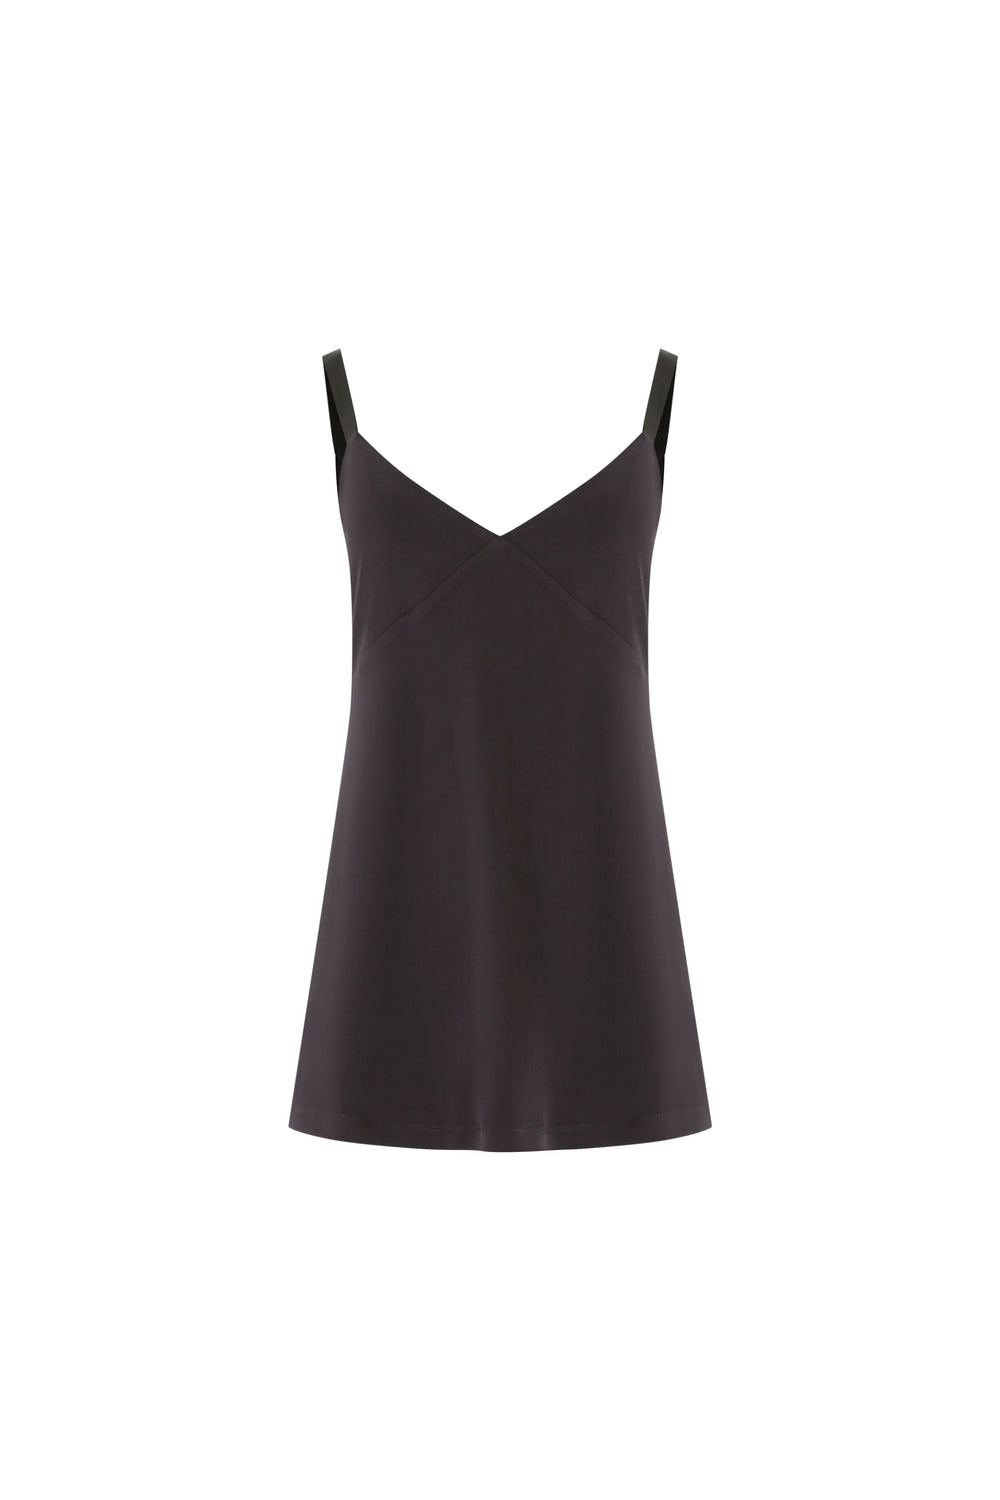 Curate Cami Thing Camisole - Black - Shop 9